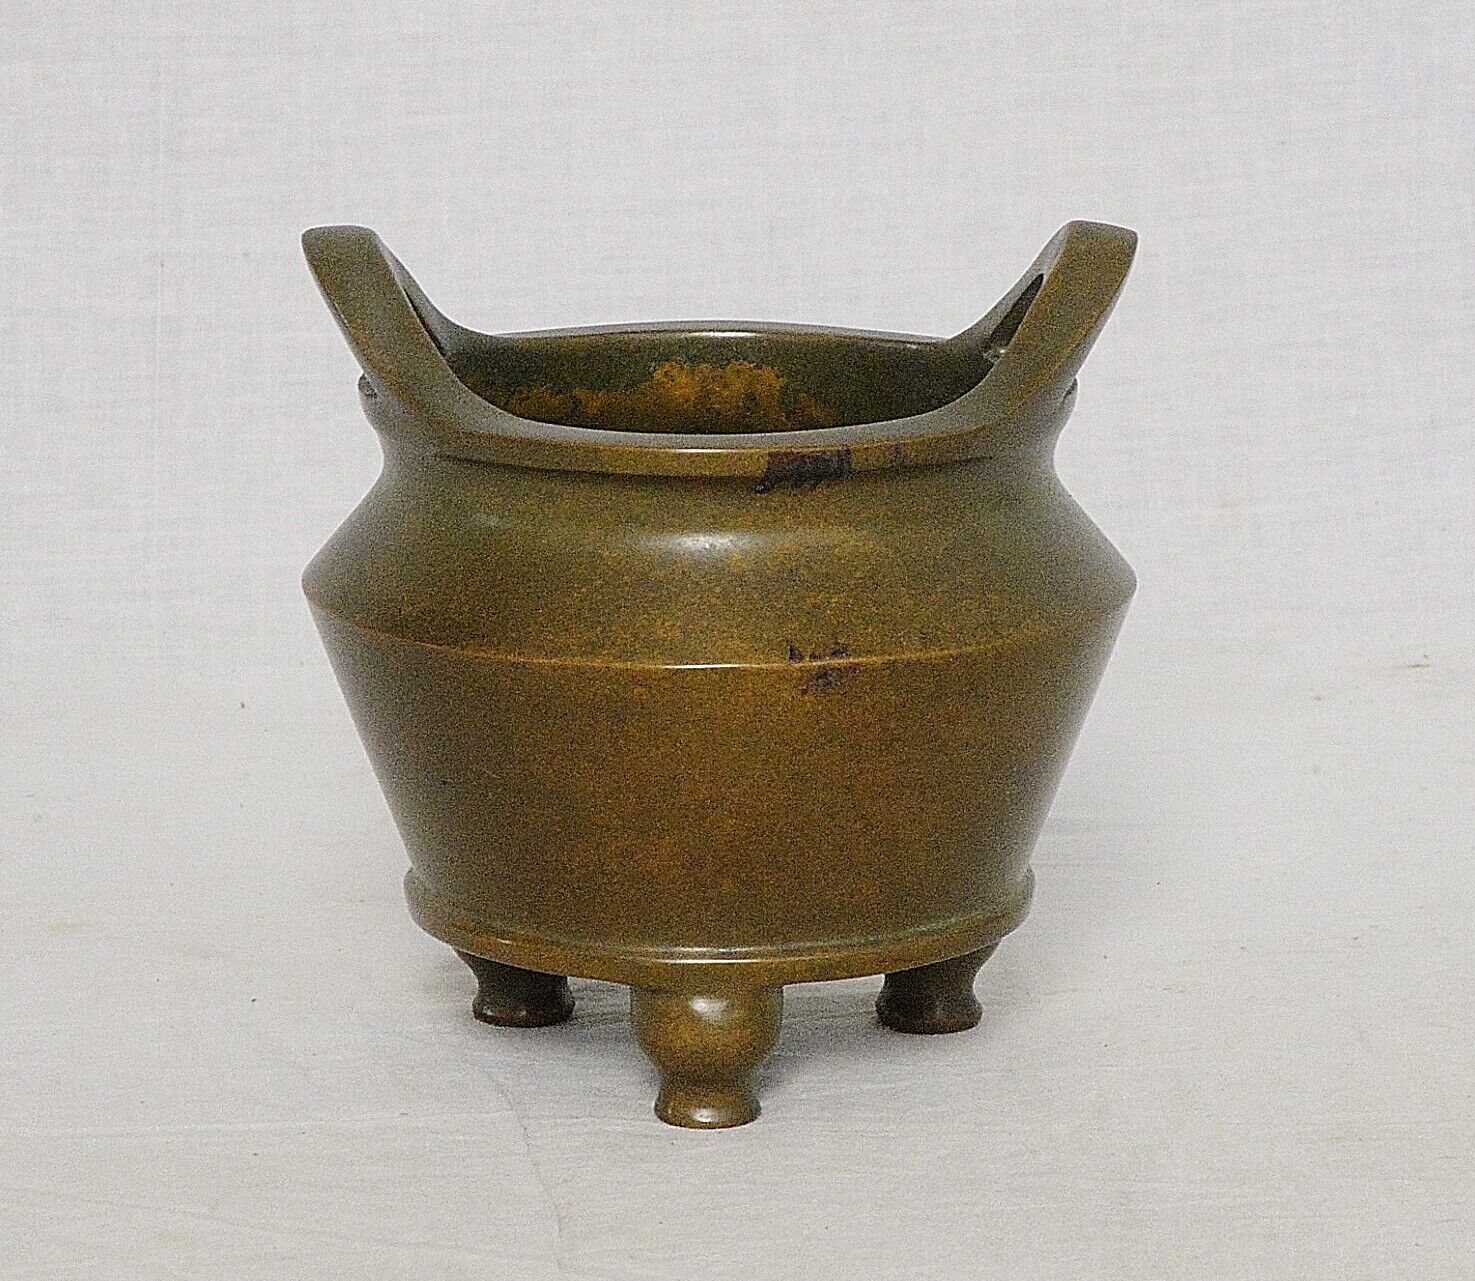 Chinese  Bronze  Tripod   Incense  Burner  With  Mark        M37